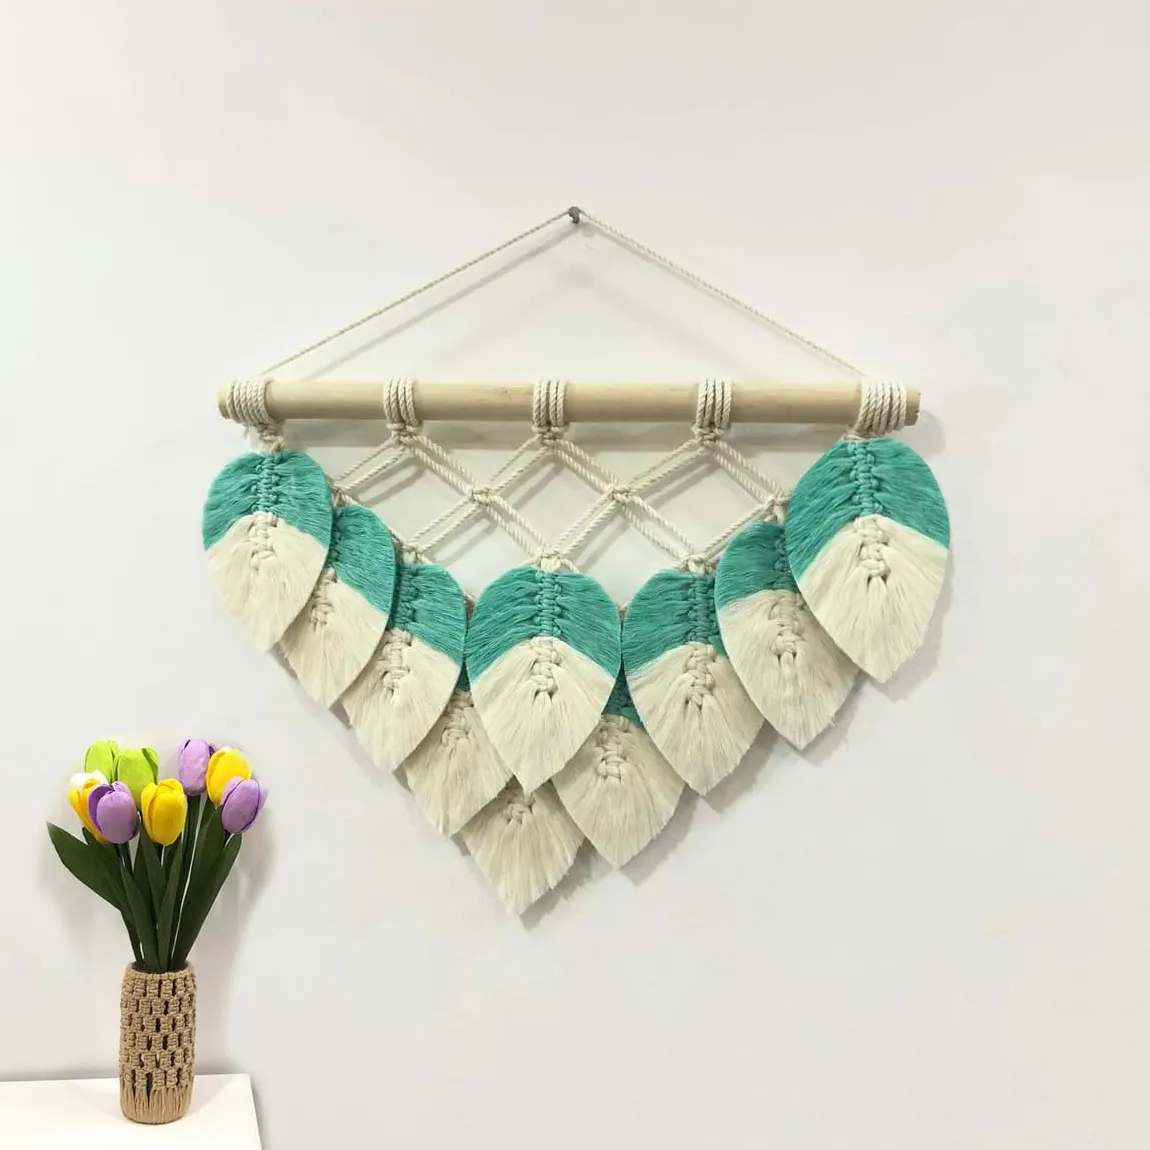 cyan white macrame leaf hanging wall decor and home decor wall item